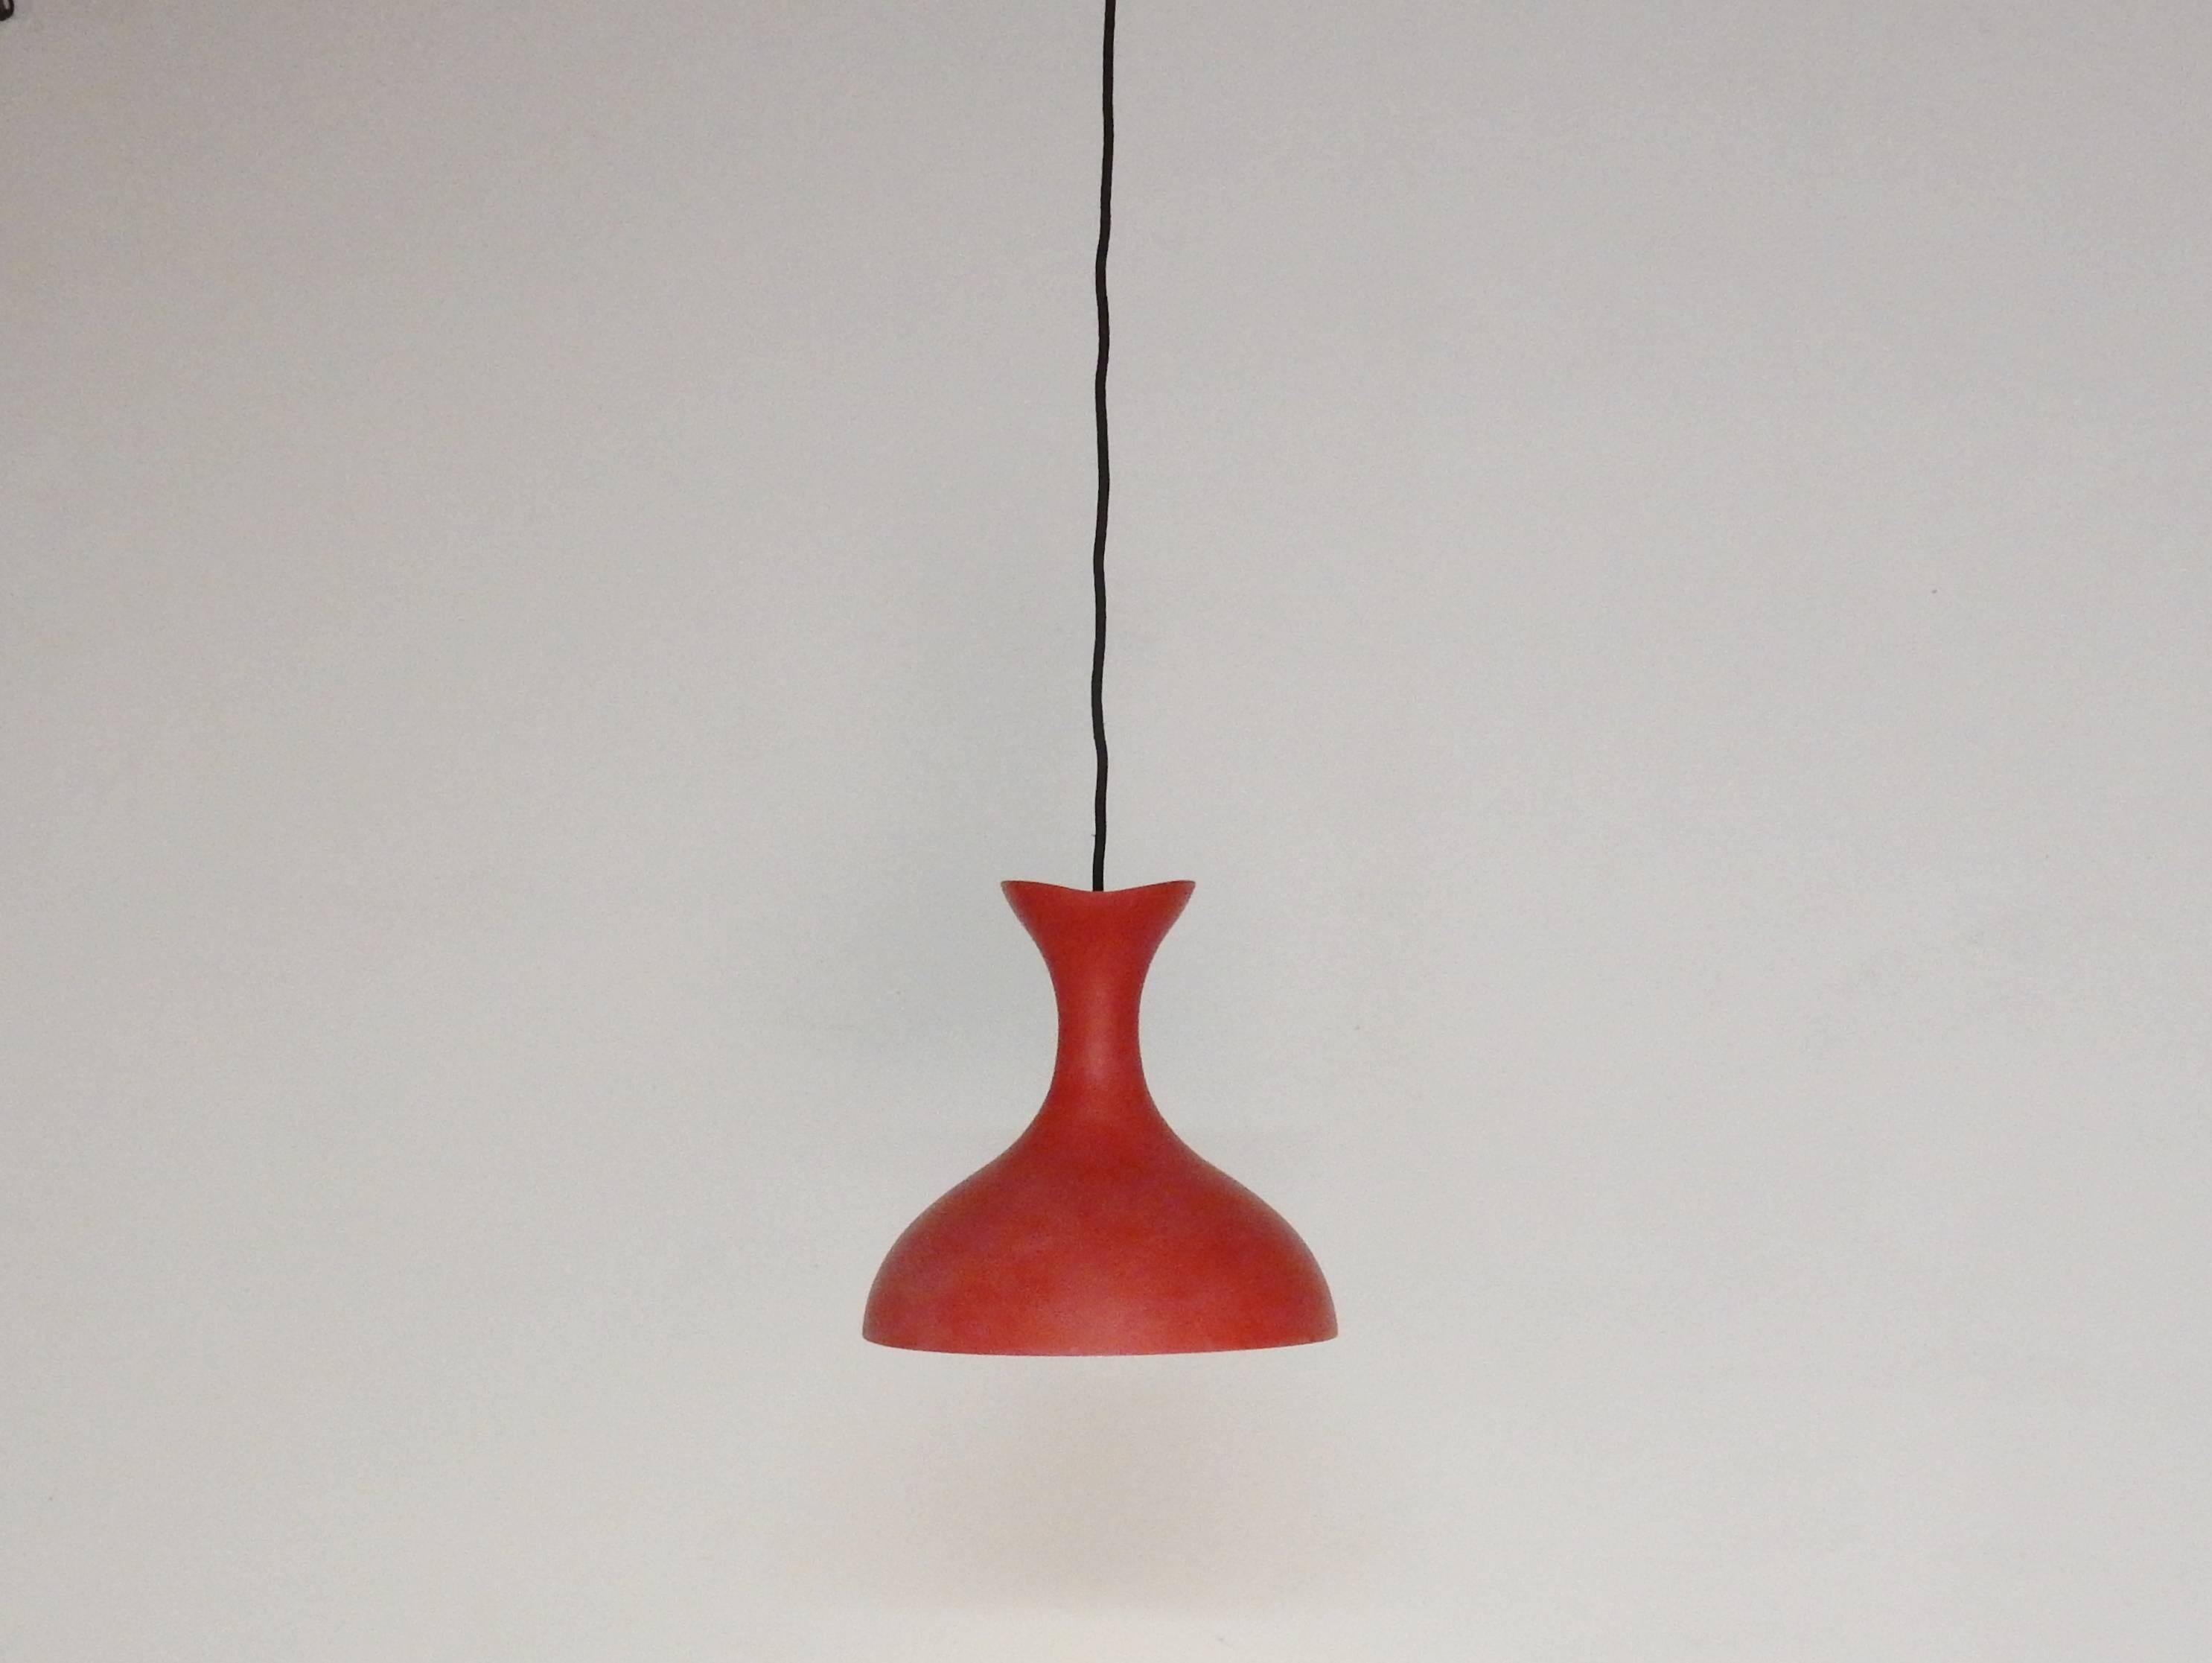 Very good looking red pendant light that we picked up in Denmark. The design and color could also make this light to be of Swedish origin, or maybe even Italian. The design reminds of, for example, designs by Svend Aage Holm Sørensen or Stilnovo.